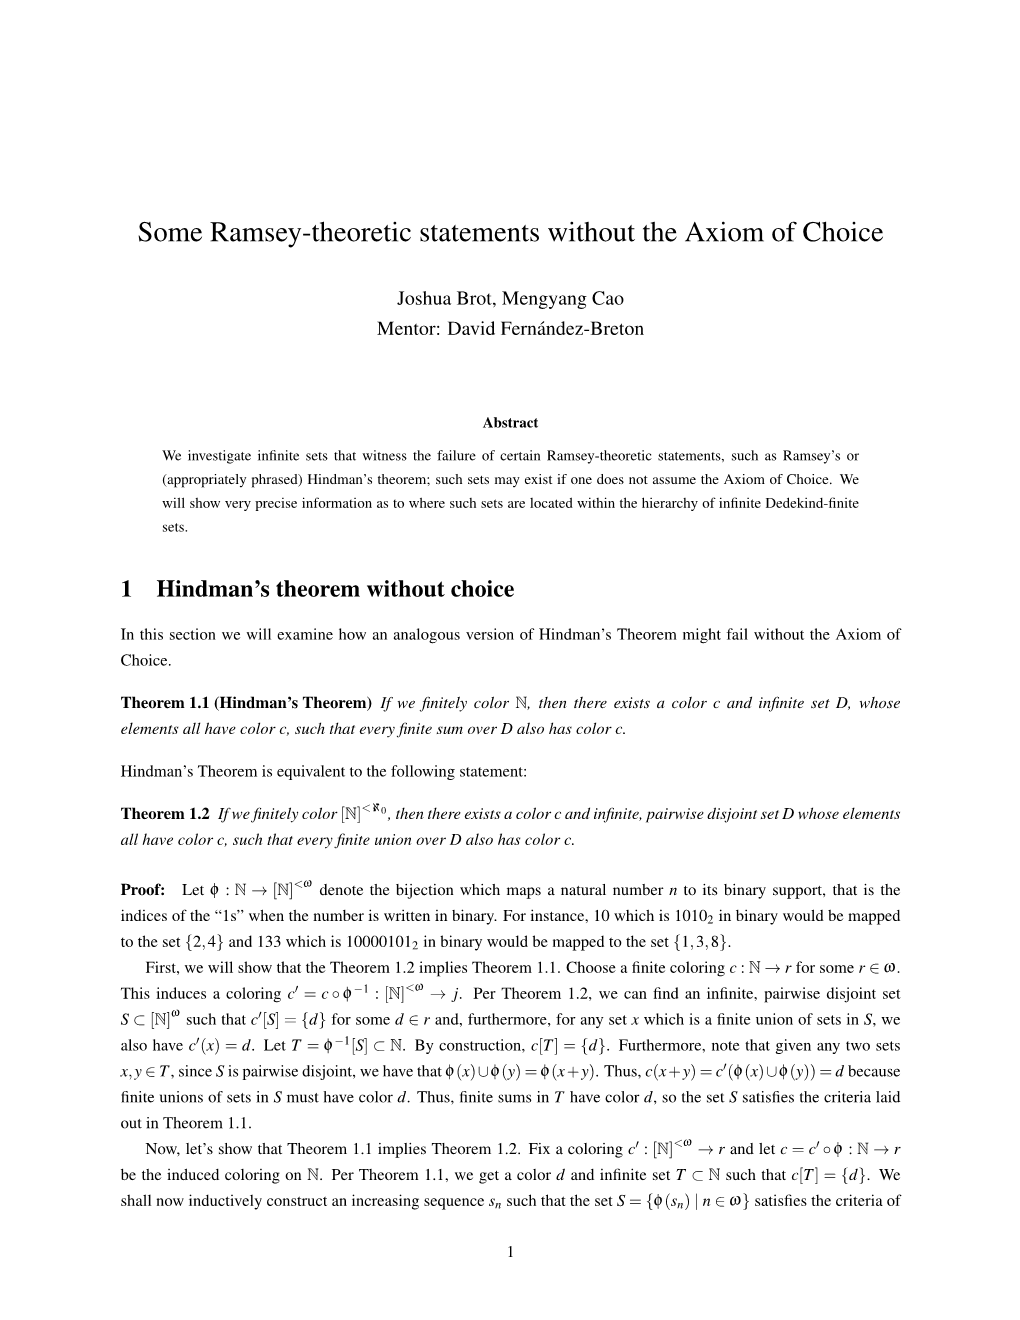 Some Ramsey-Theoretic Statements Without the Axiom of Choice